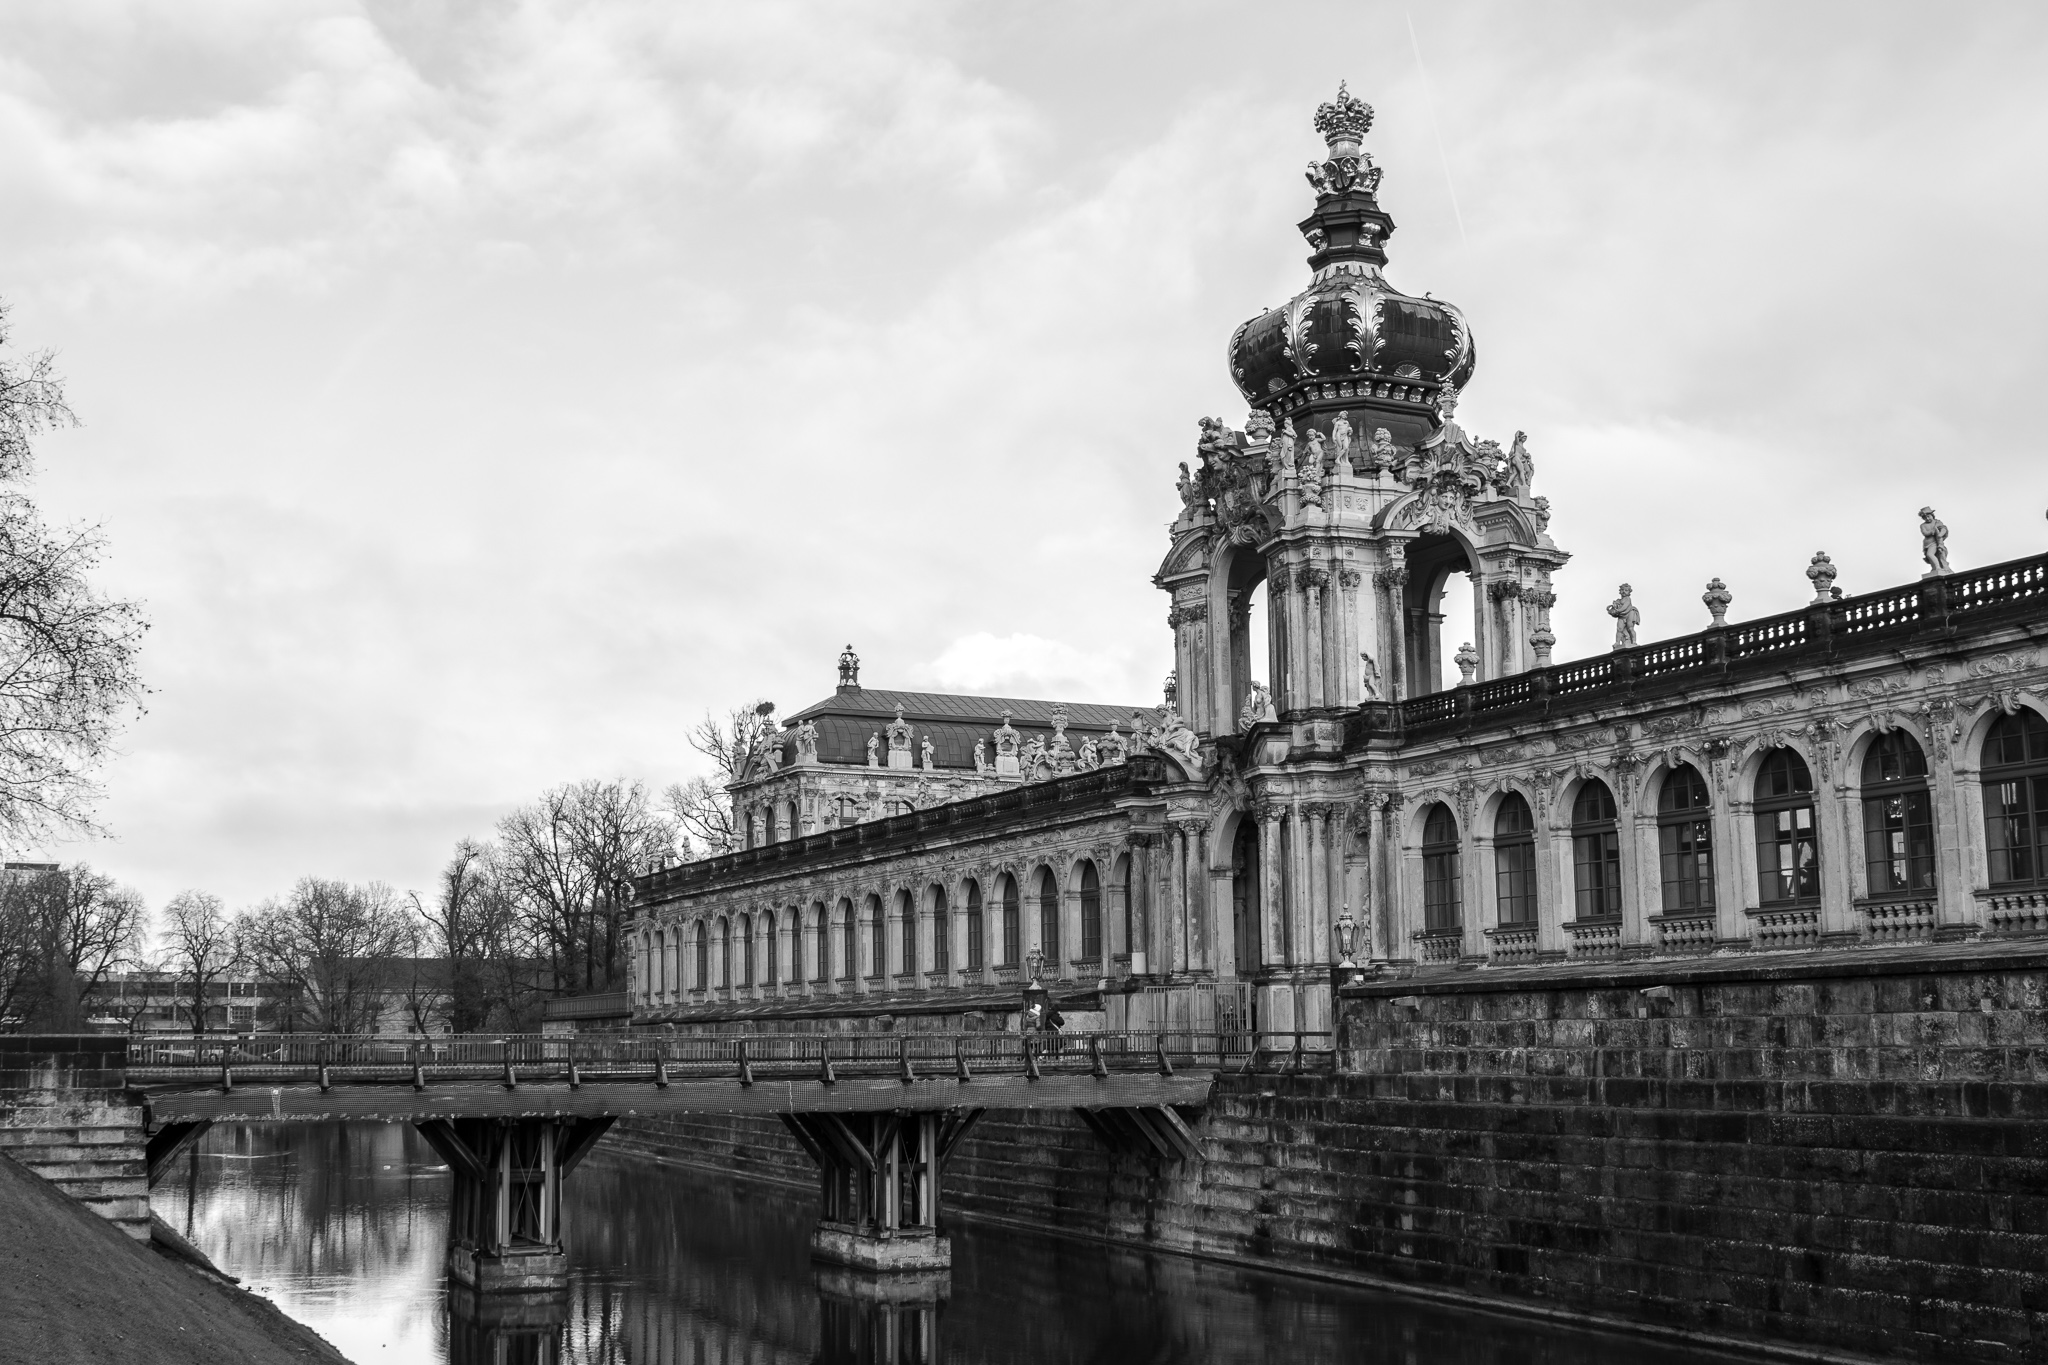 Located on the banks of the Elbe, the Dresden Palace is one of the oldest buildings in the Saxon city. <br>It has been the residence of kings before it was almost destroyed during the bombing of Dresden in 1945 during World War II.